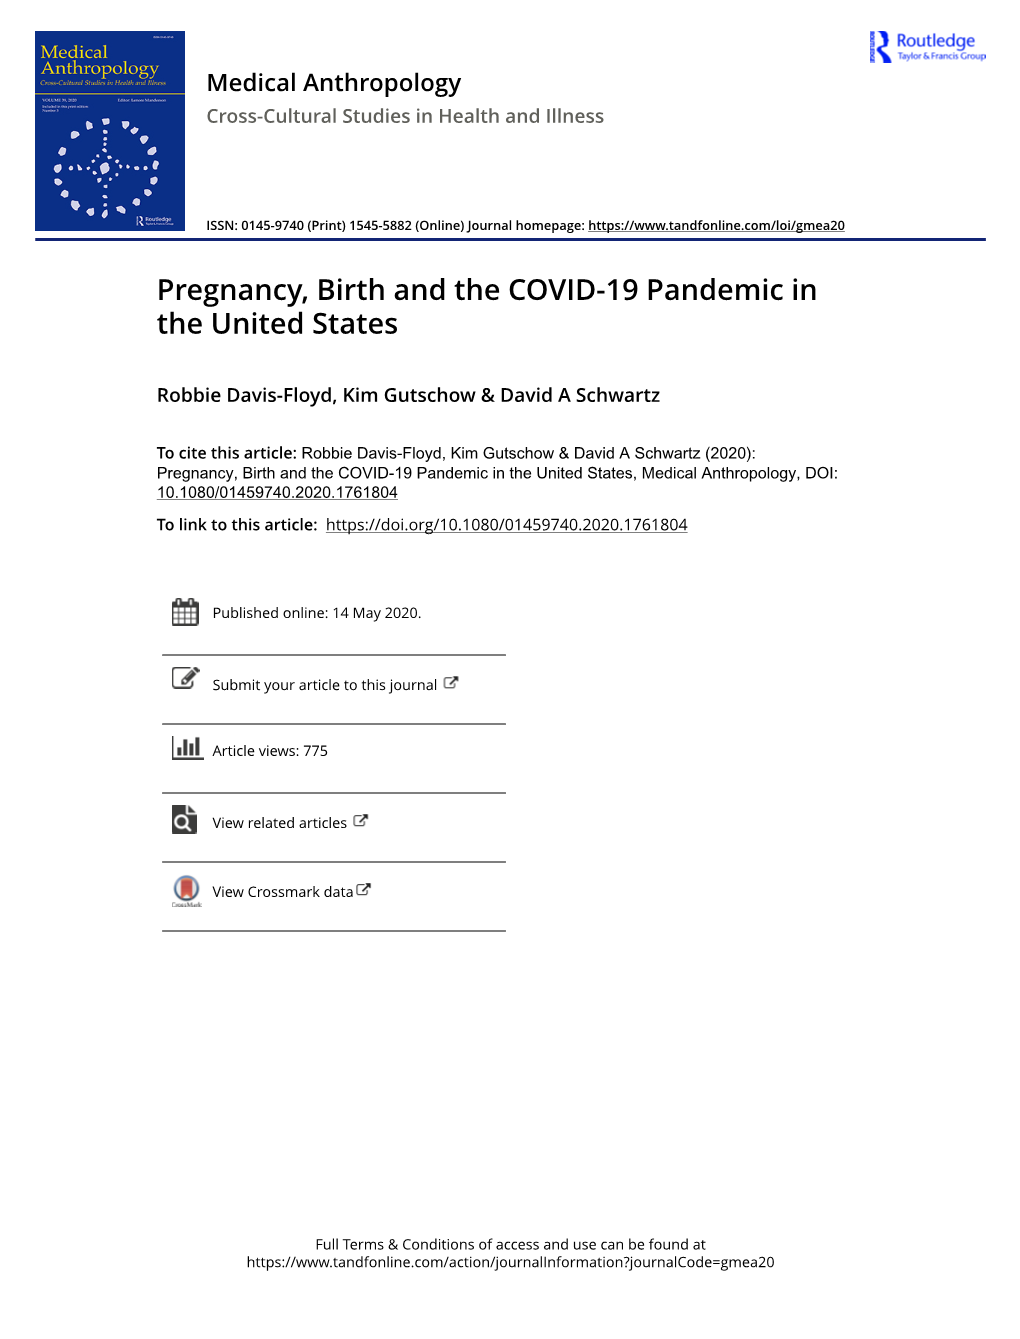 Pregnancy, Birth and the COVID-19 Pandemic in the United States